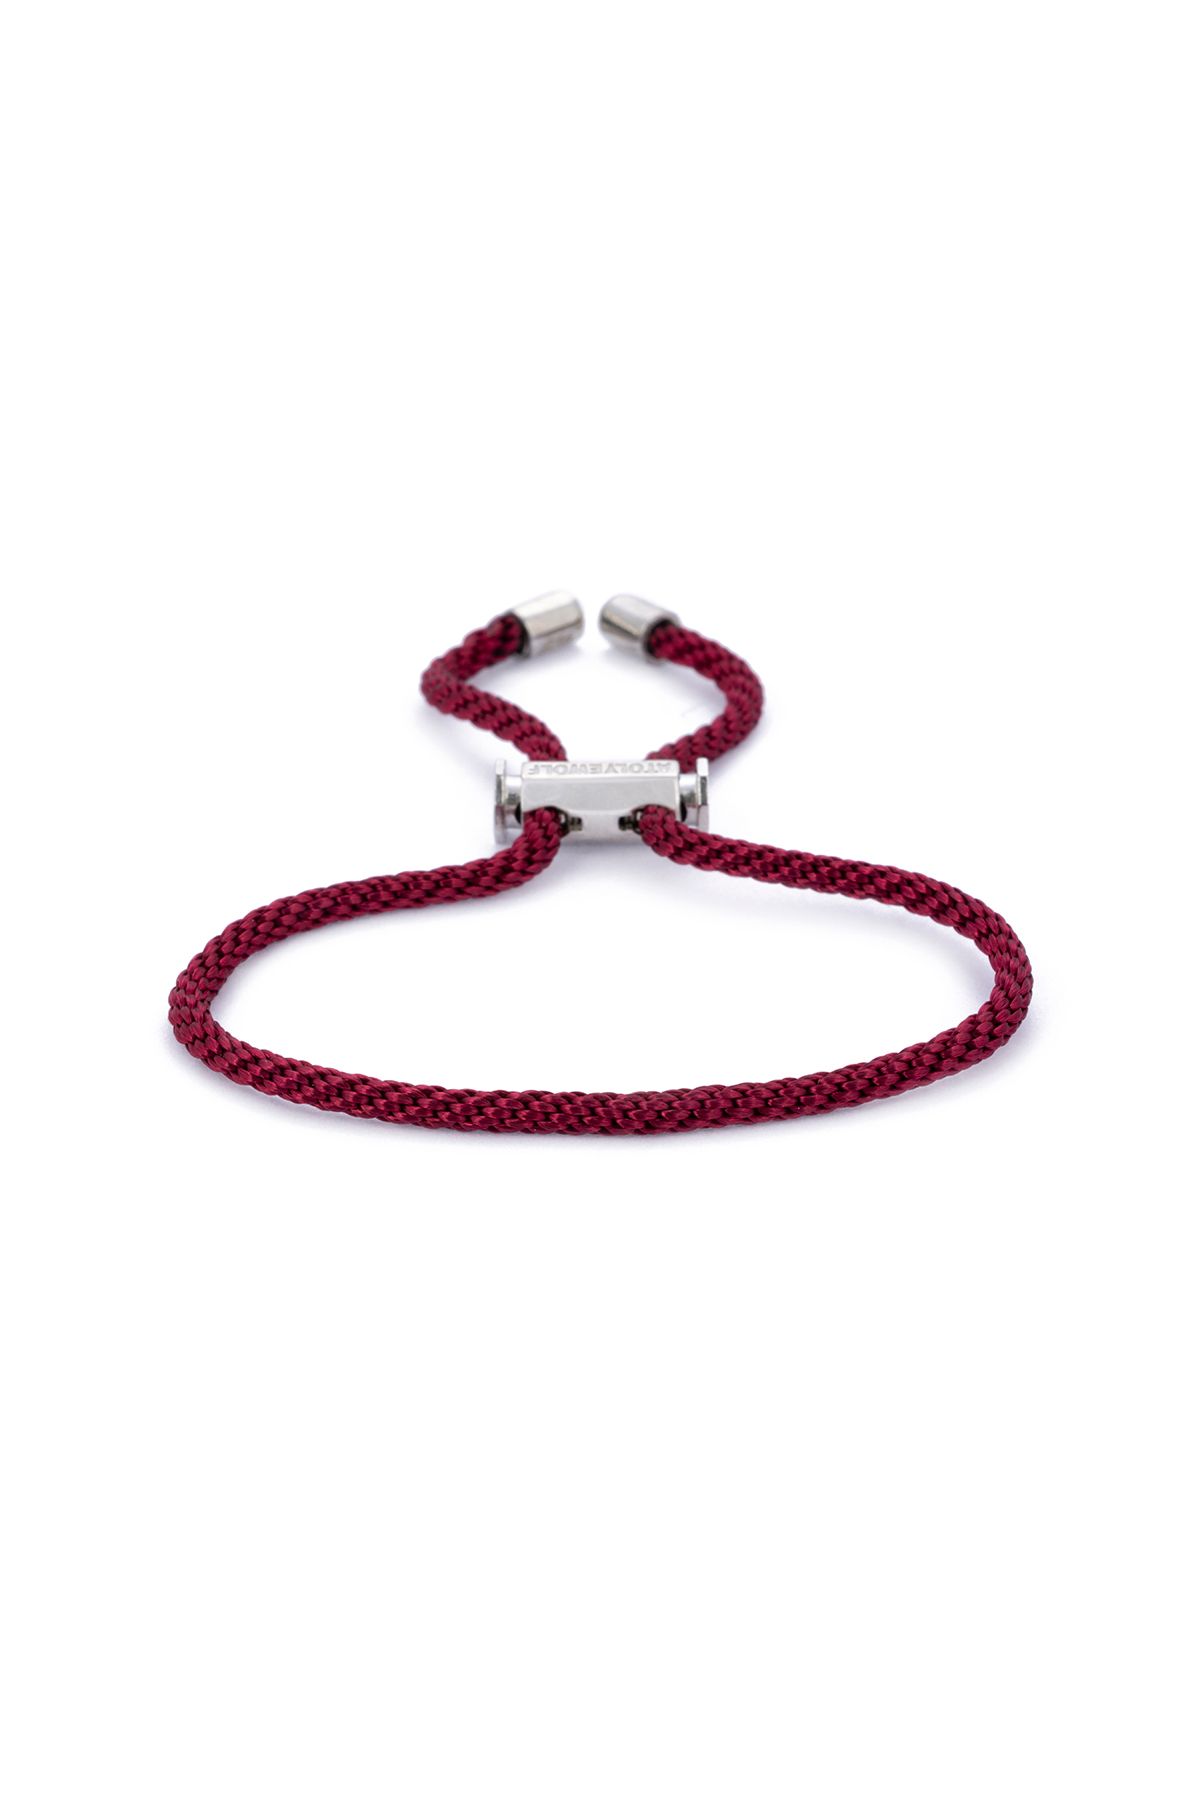 Atolyewolf Claret Red Lace Bracelet in Silver